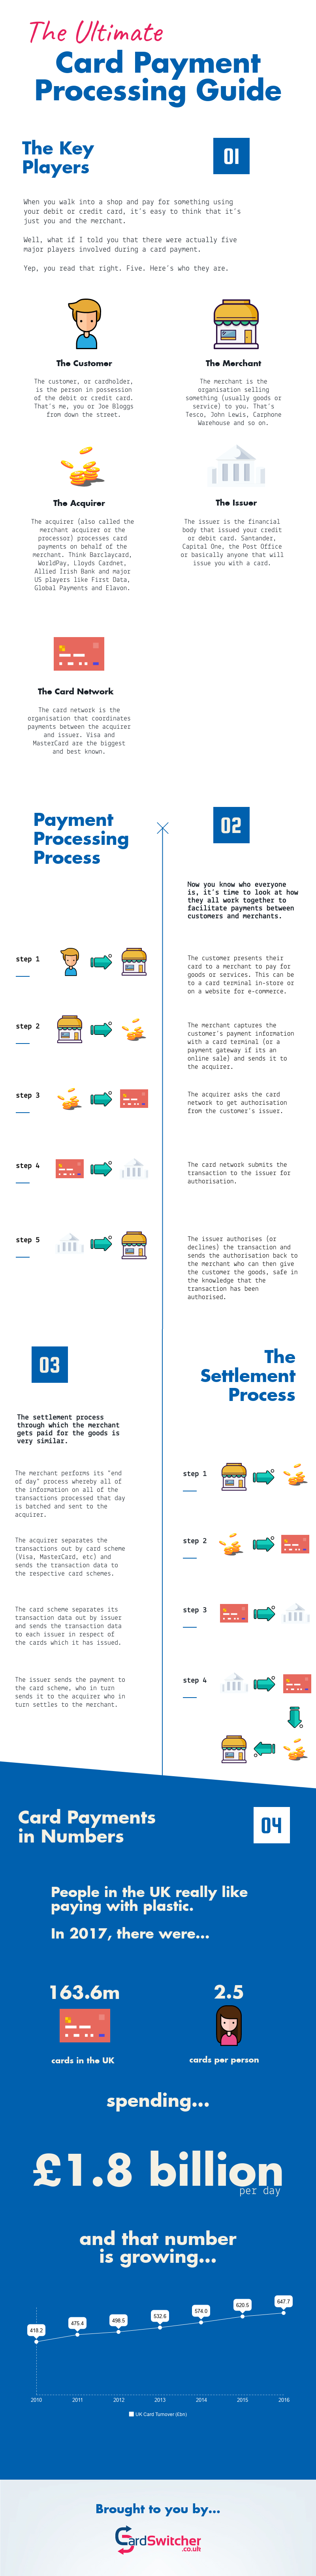 The Ultimate Card Payment Processing Infograpic